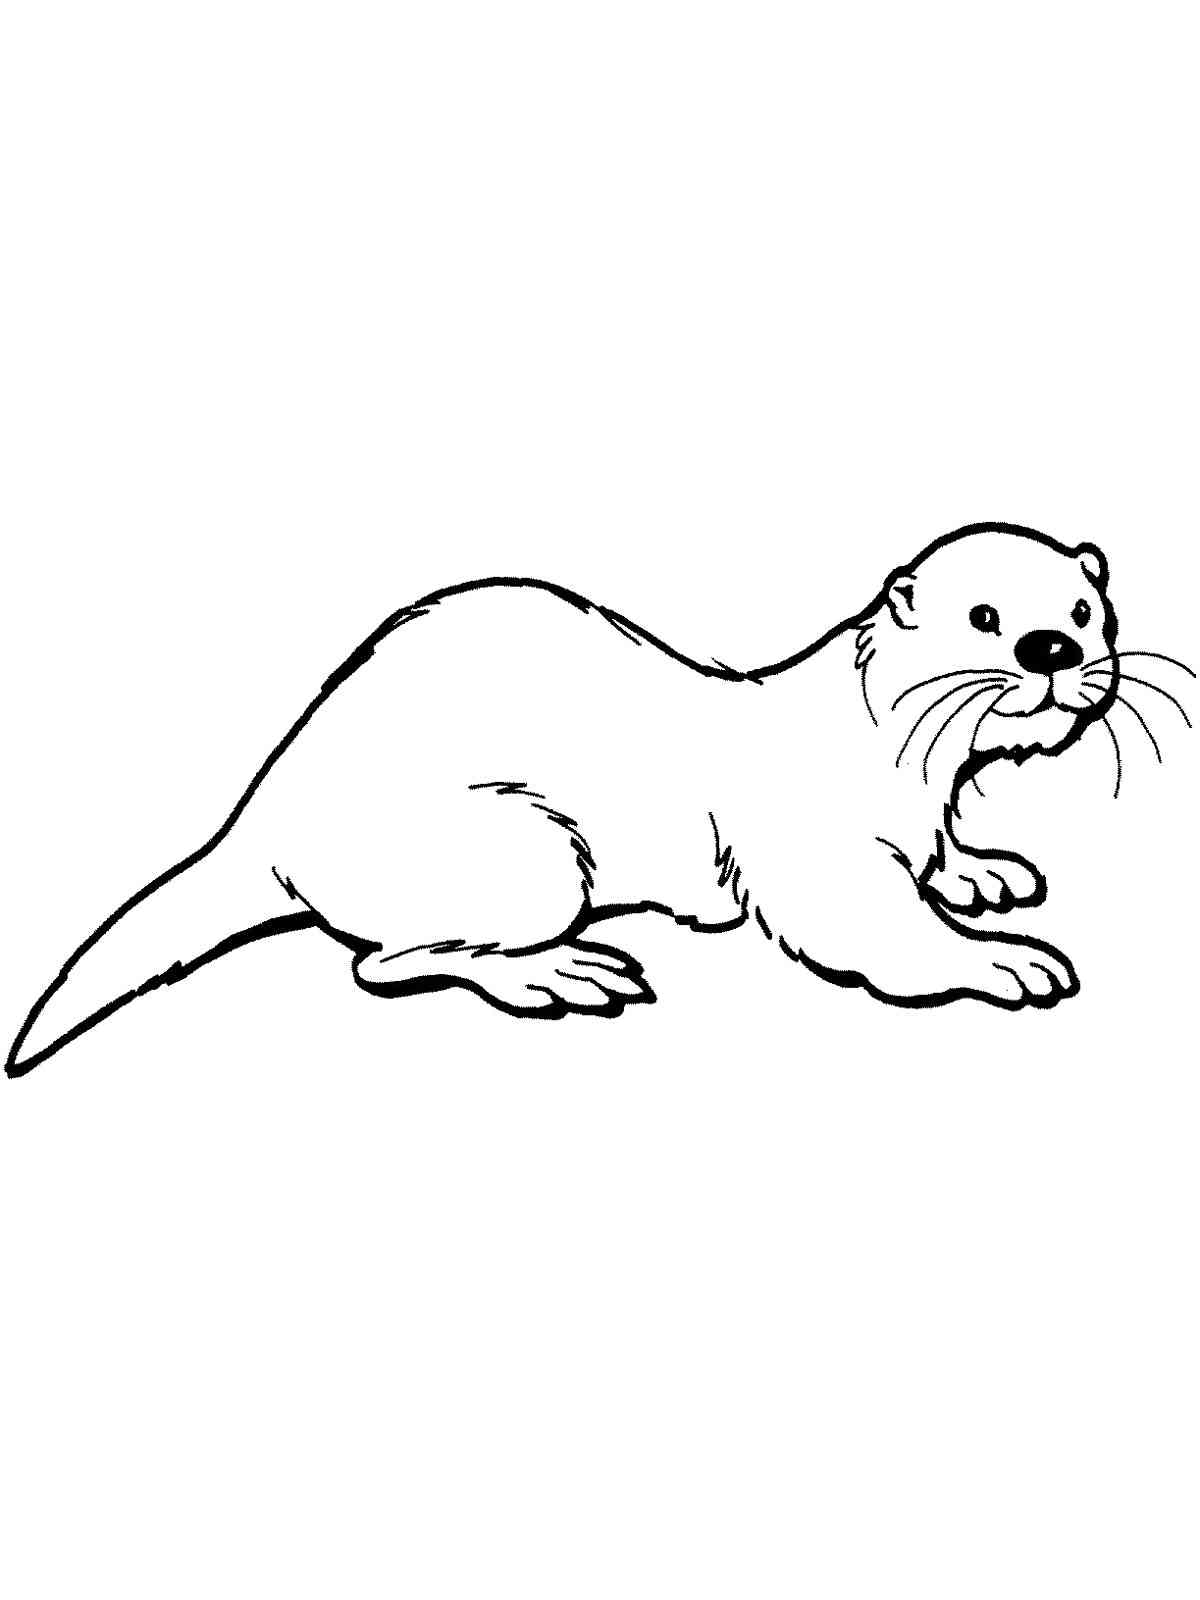 Easy Otter coloring page